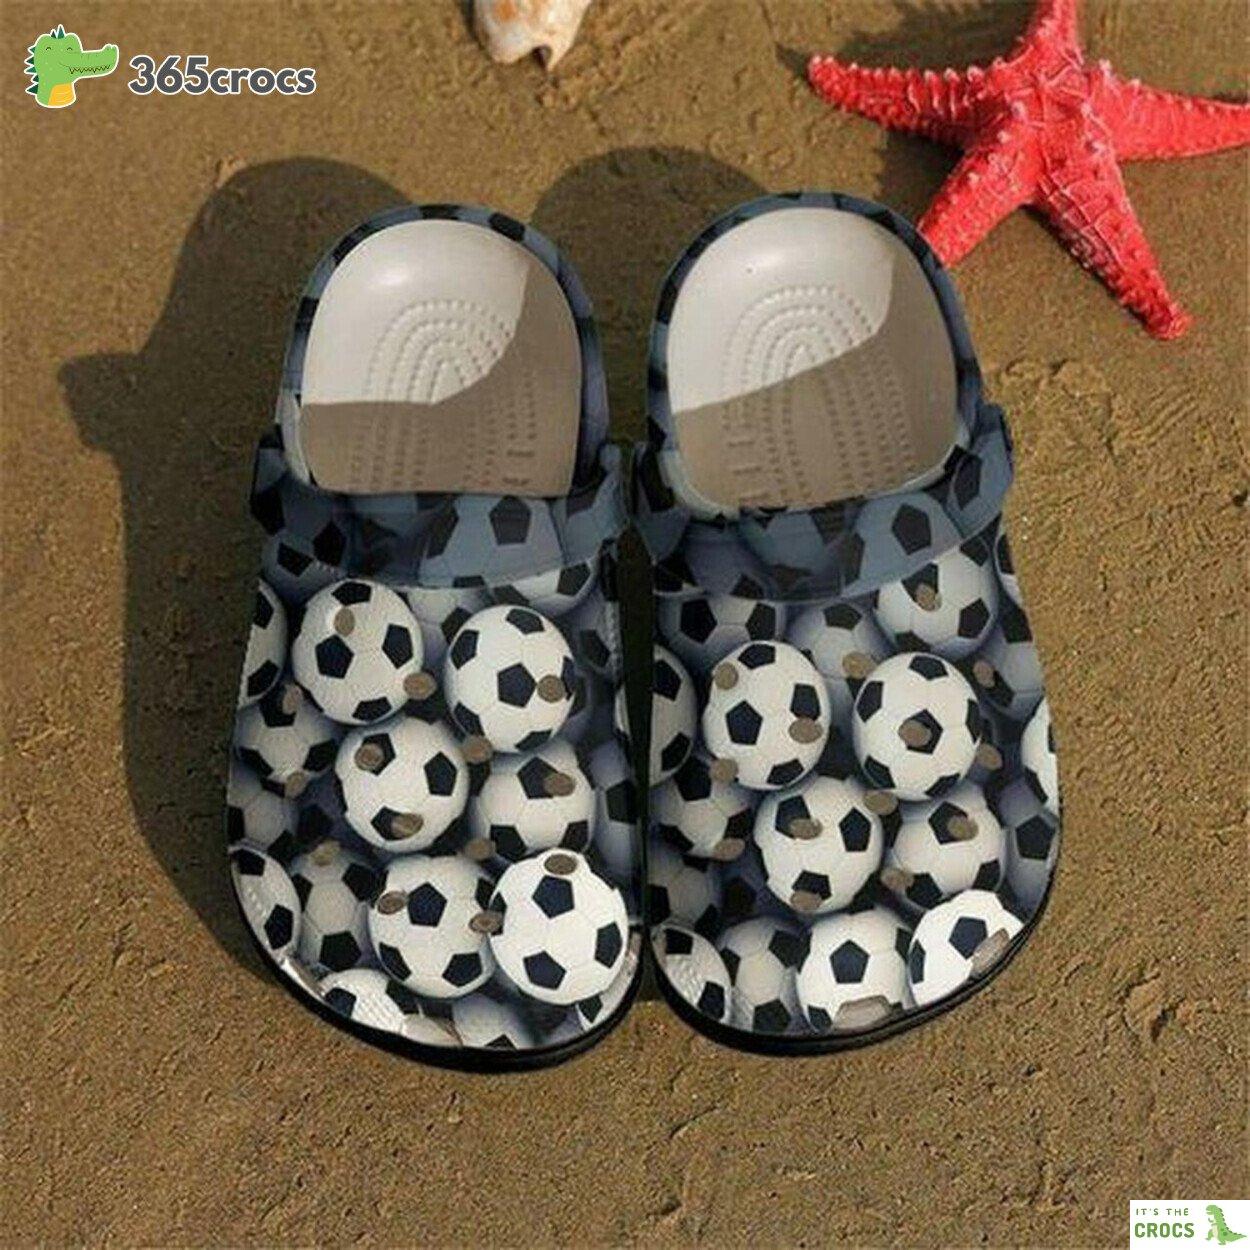 Vintage Soccer Ball Design Celebrated on Stylish and Sporty Clogs Shoes